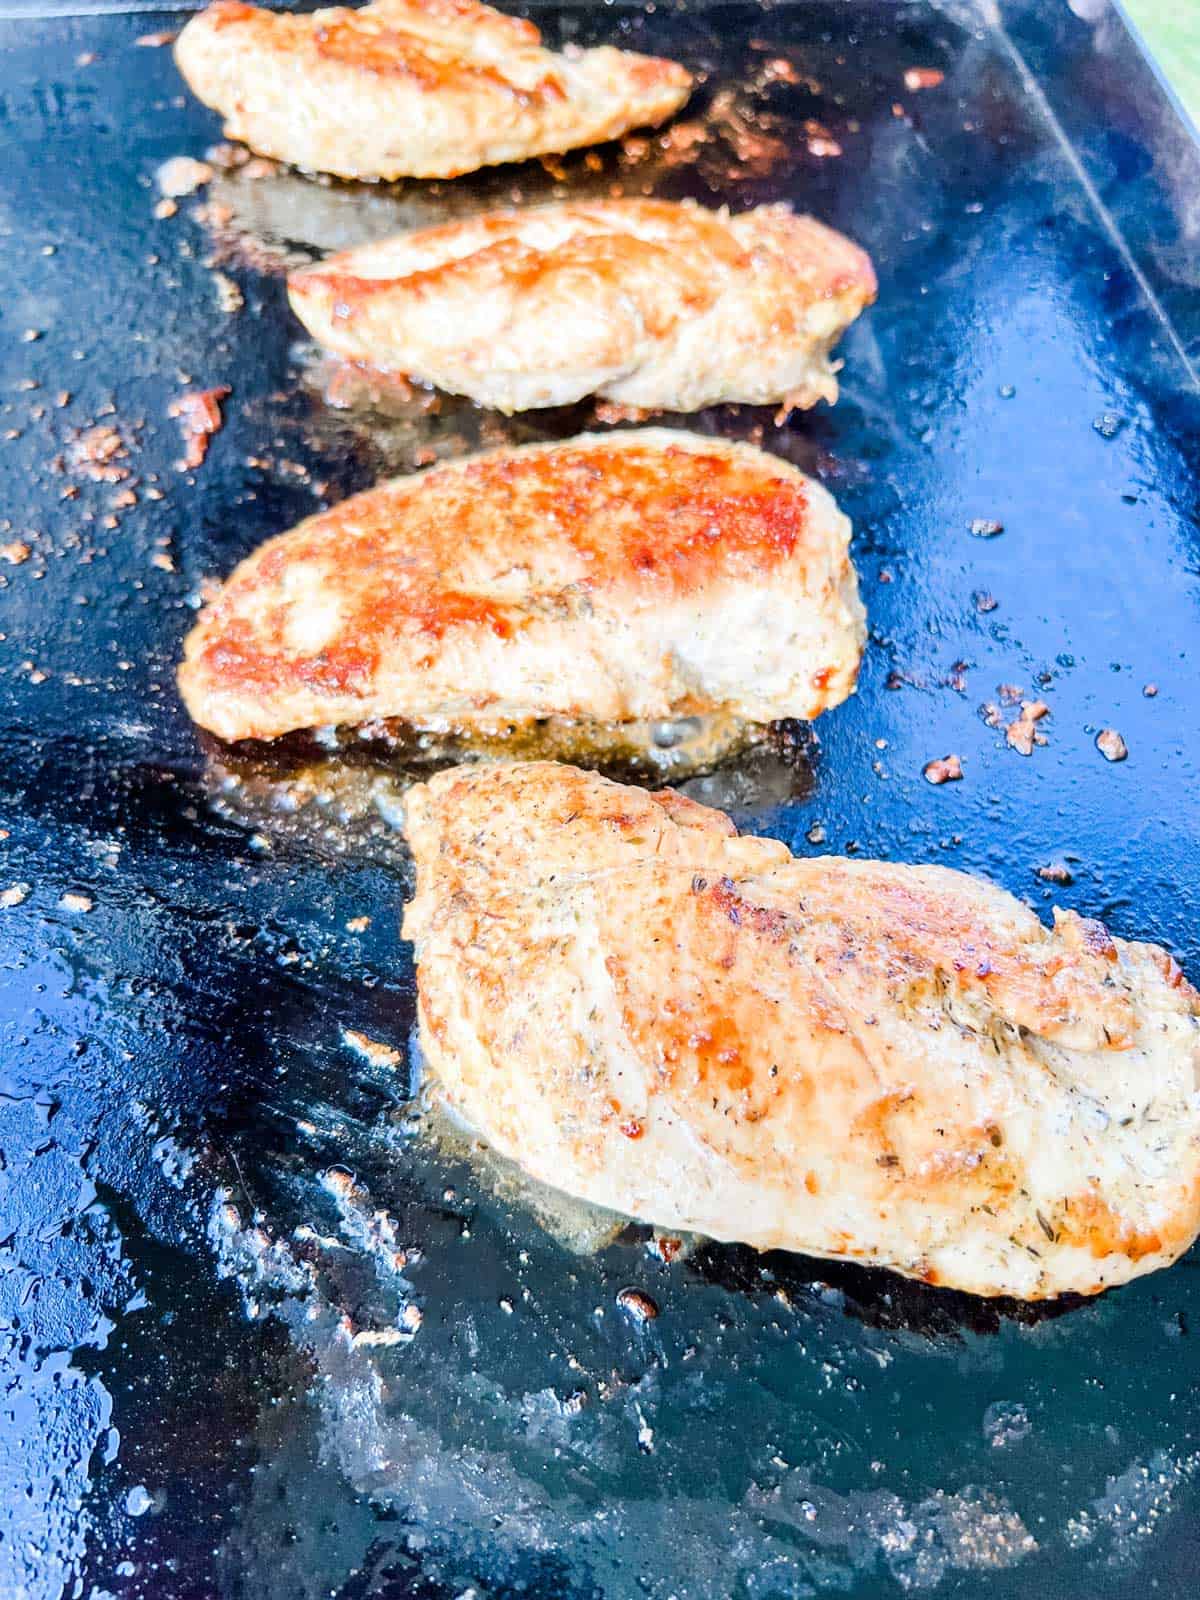 Photo of chicken that is partially cooked on a blackstone griddle.